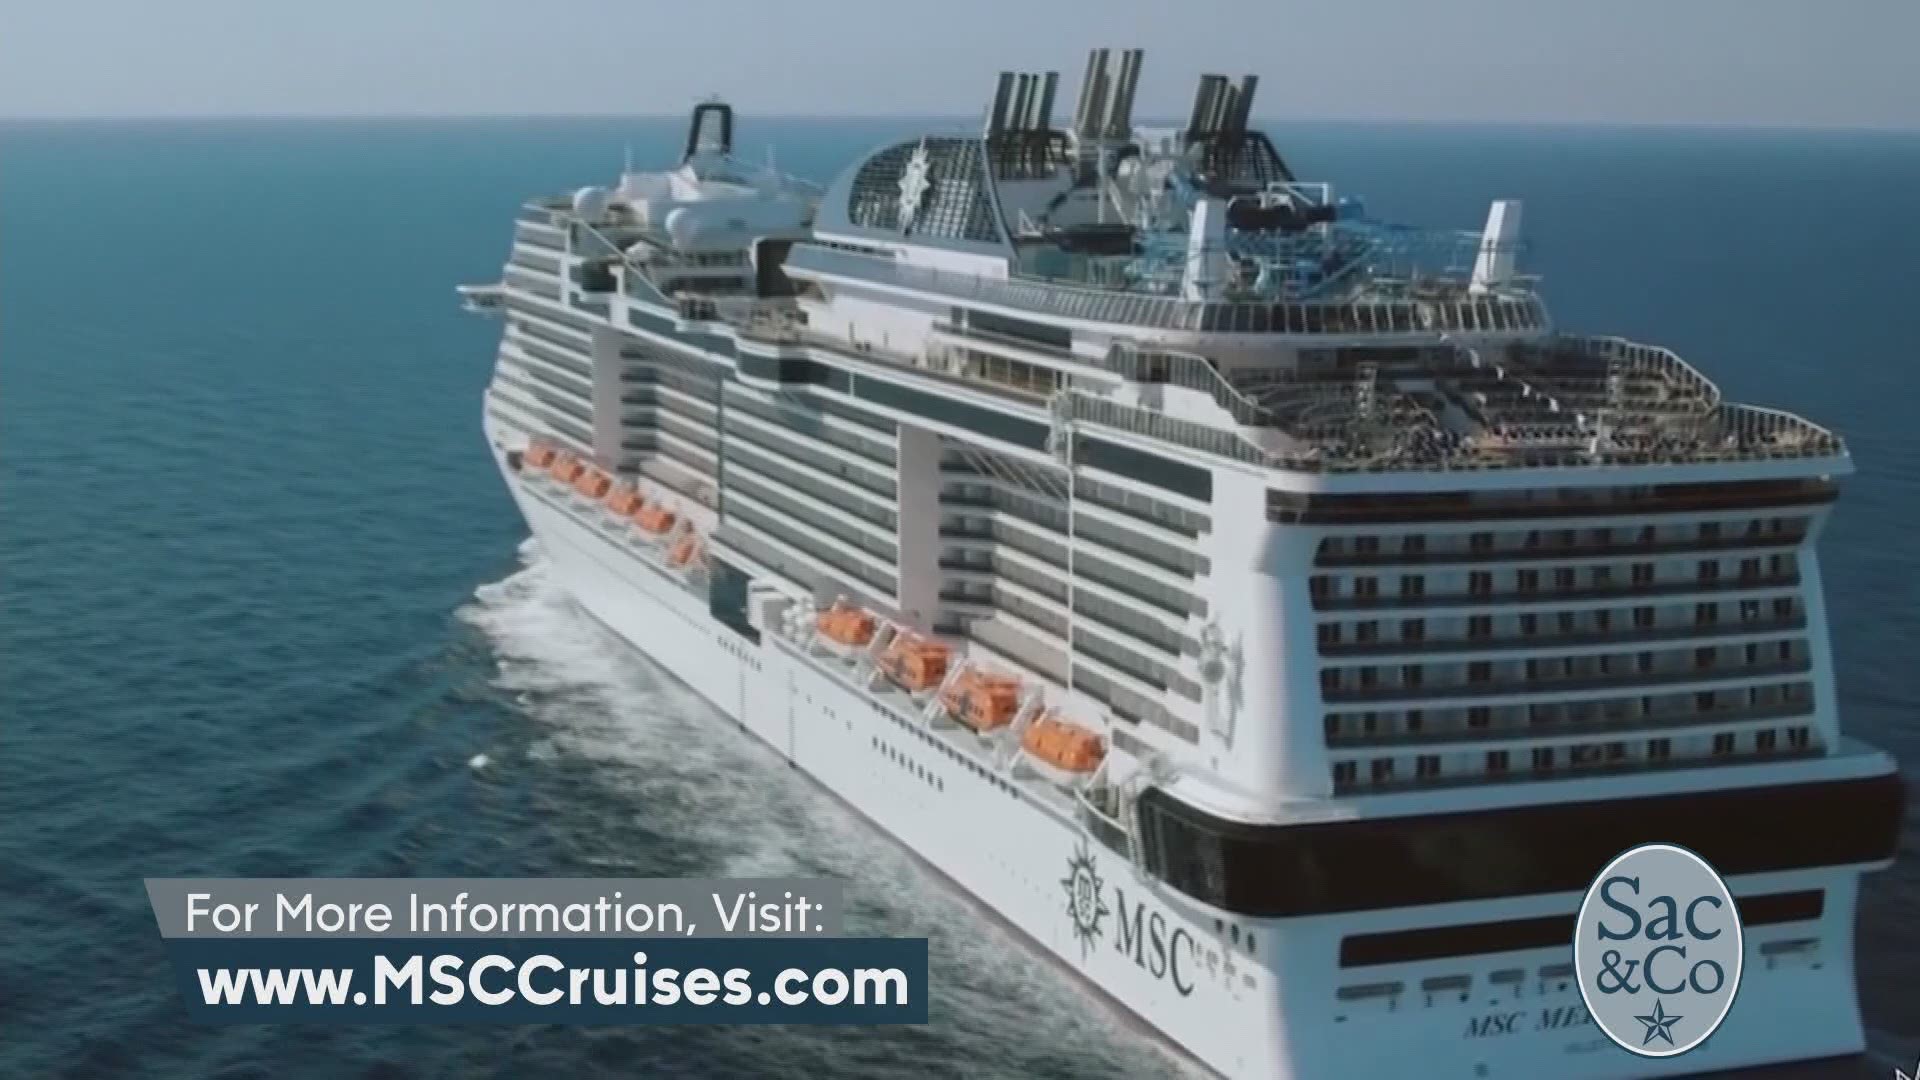 Aubrey Aquino chats with Gabe Saglie about why the end of summer is a great time to start planning your fall vacation!  The following is a paid segment sponsored by MSC Cruises.